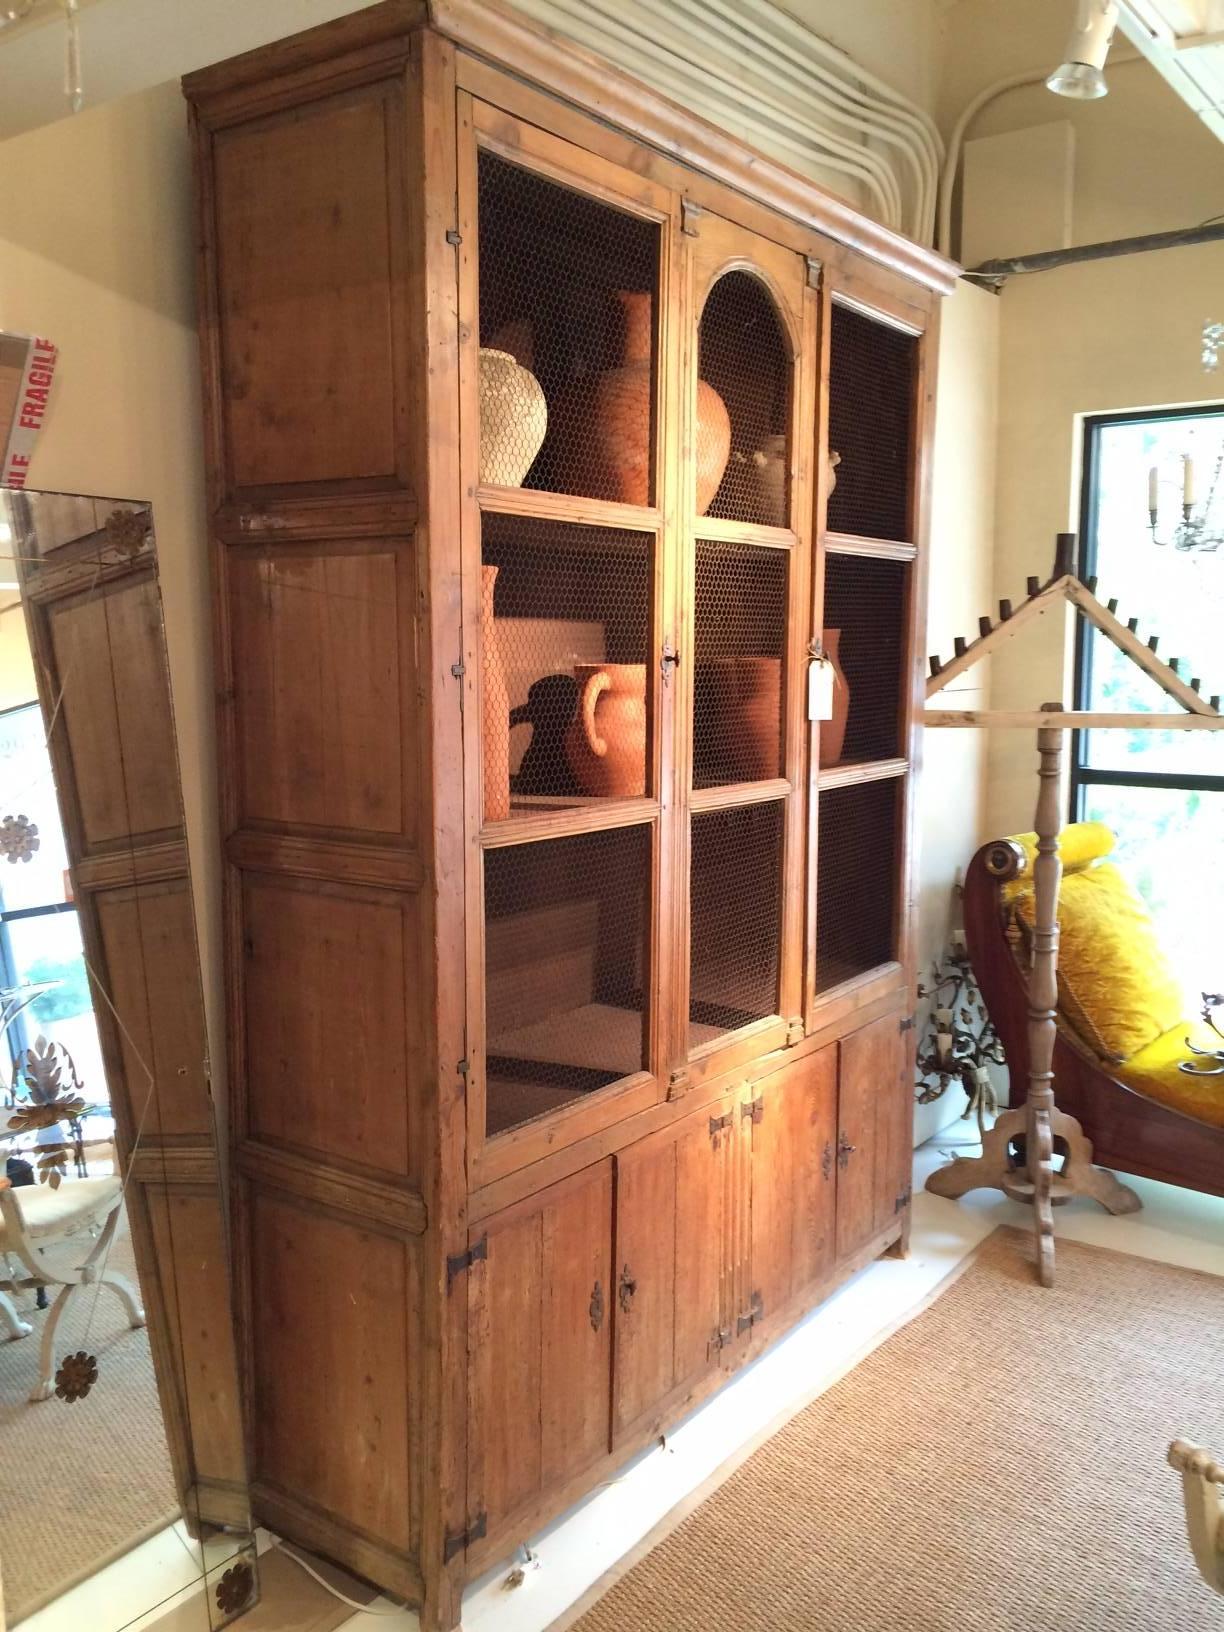 Handsome pine cabinet with two doors inset with wire grill. Beautifully molded doors and ends with central pilasters with capitals. Unusual hinges.